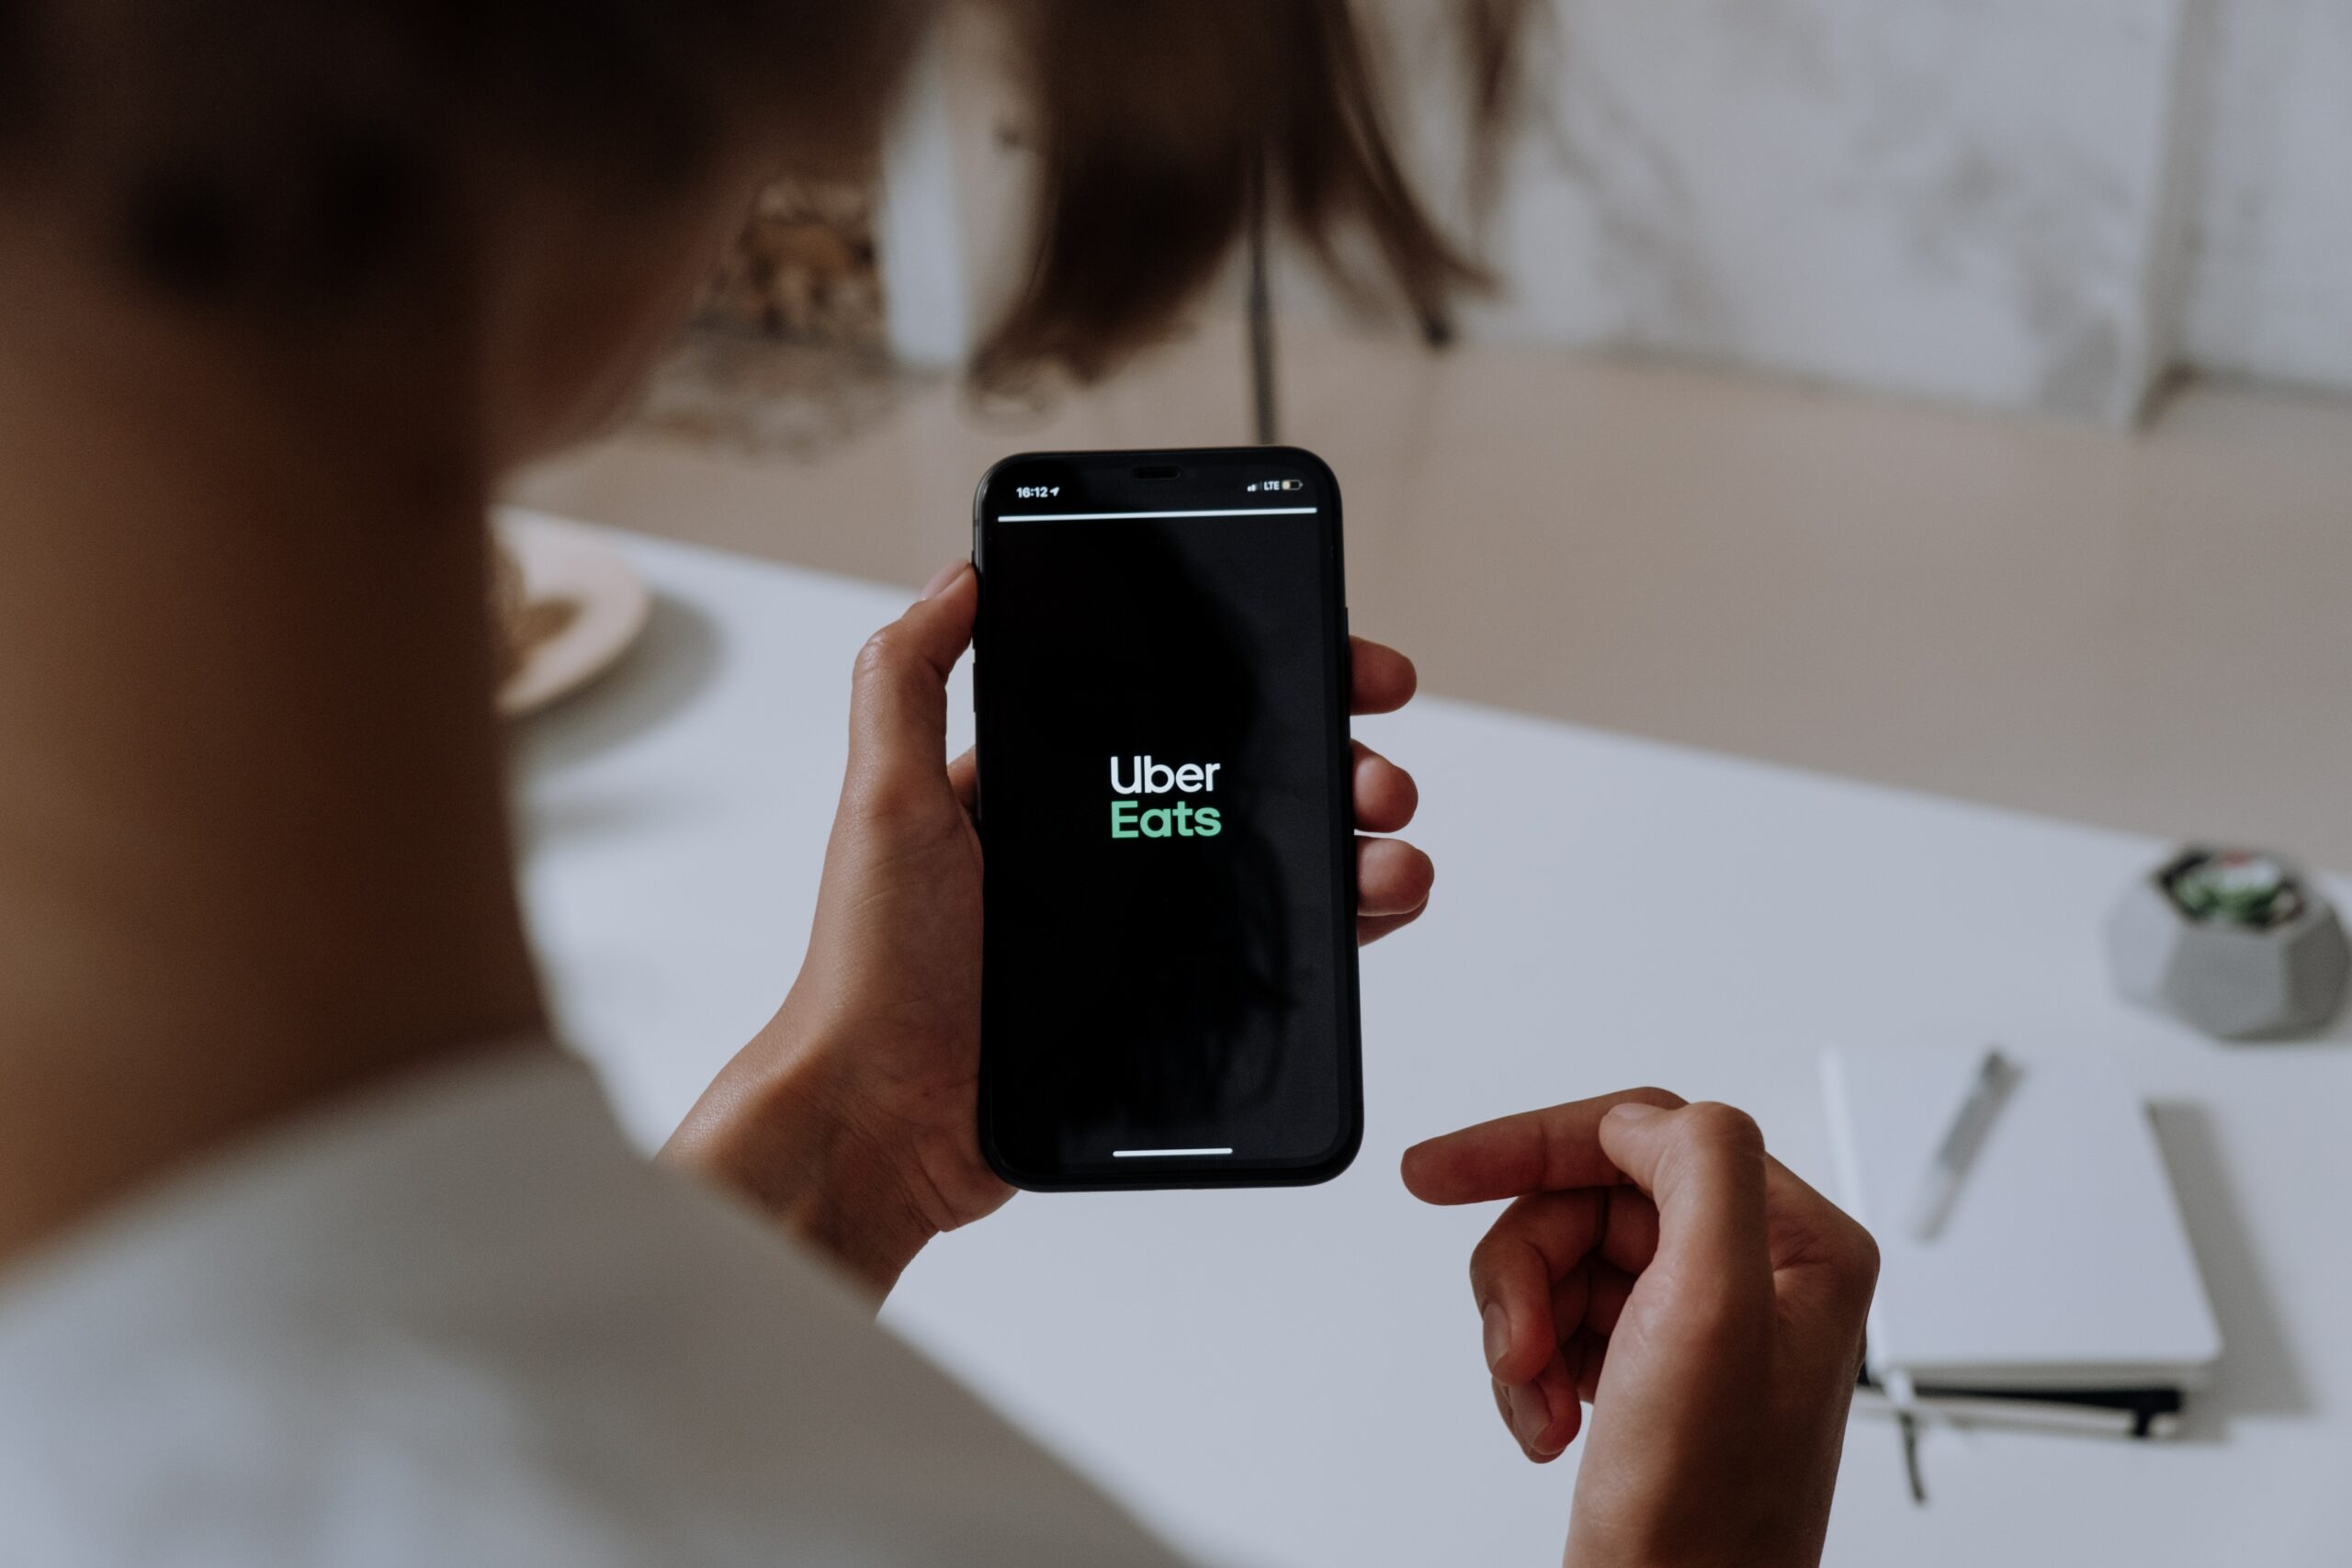 A girl holds a smartphone with Uber Eats logo on the screen.